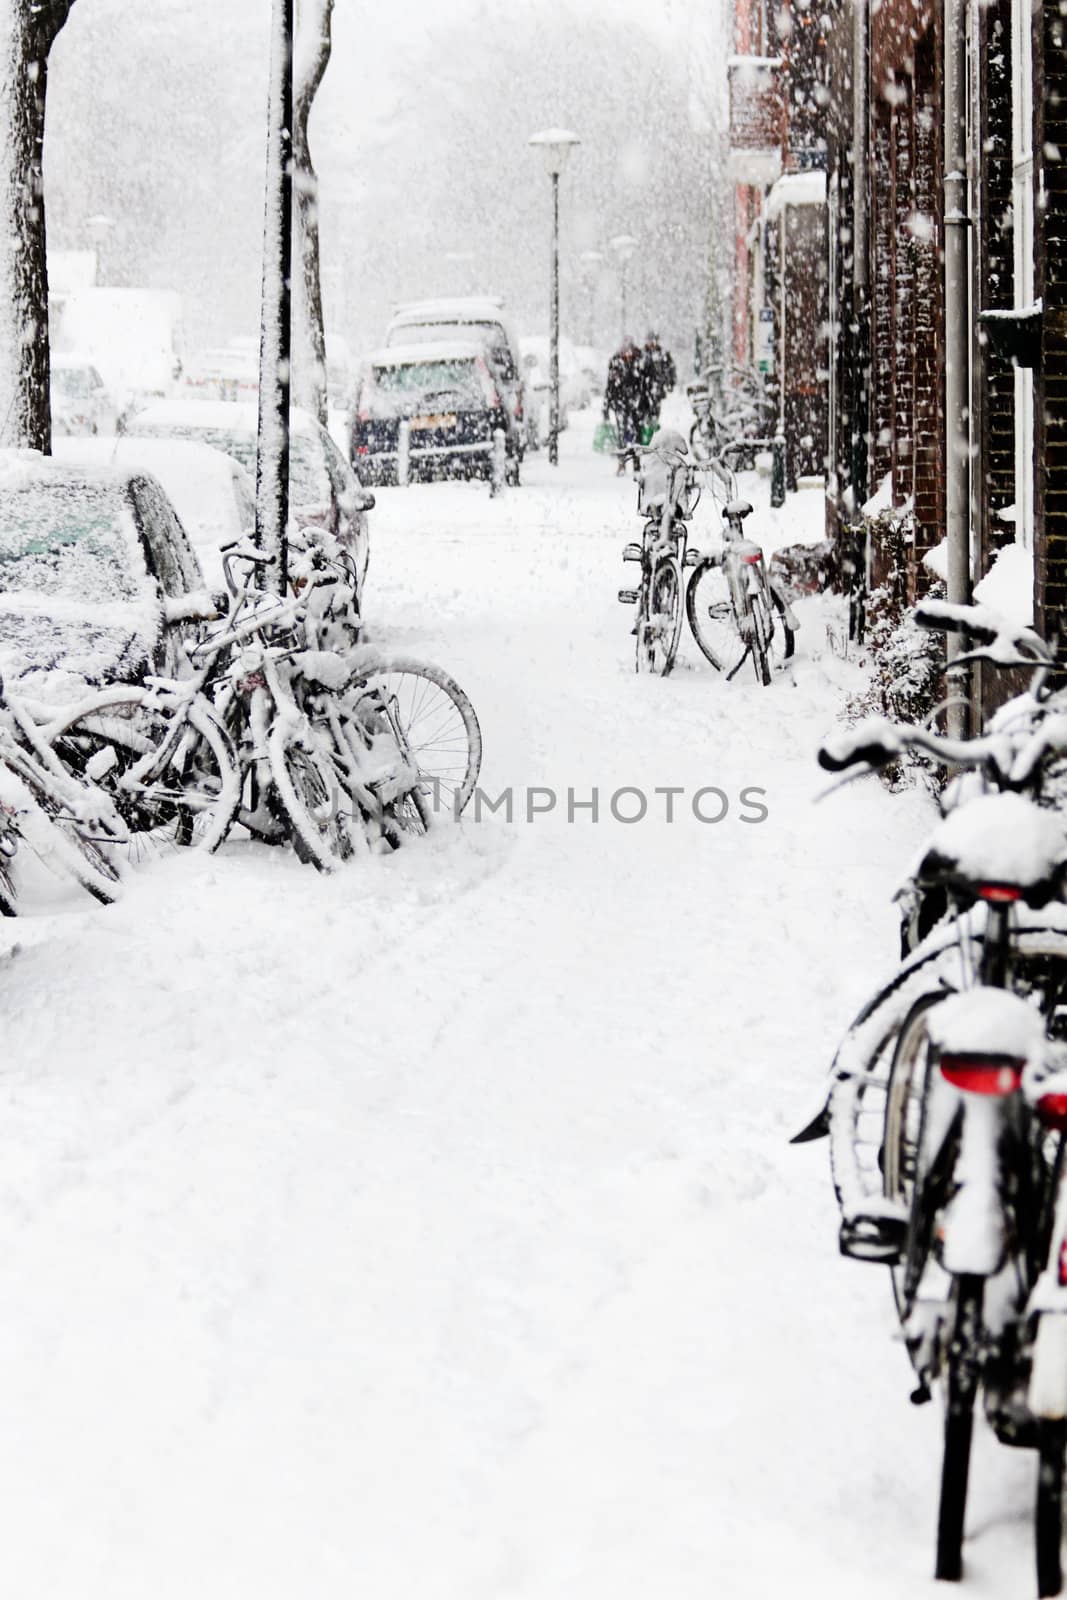 Snow in the city - snowstorm, streetview, bikes by Colette